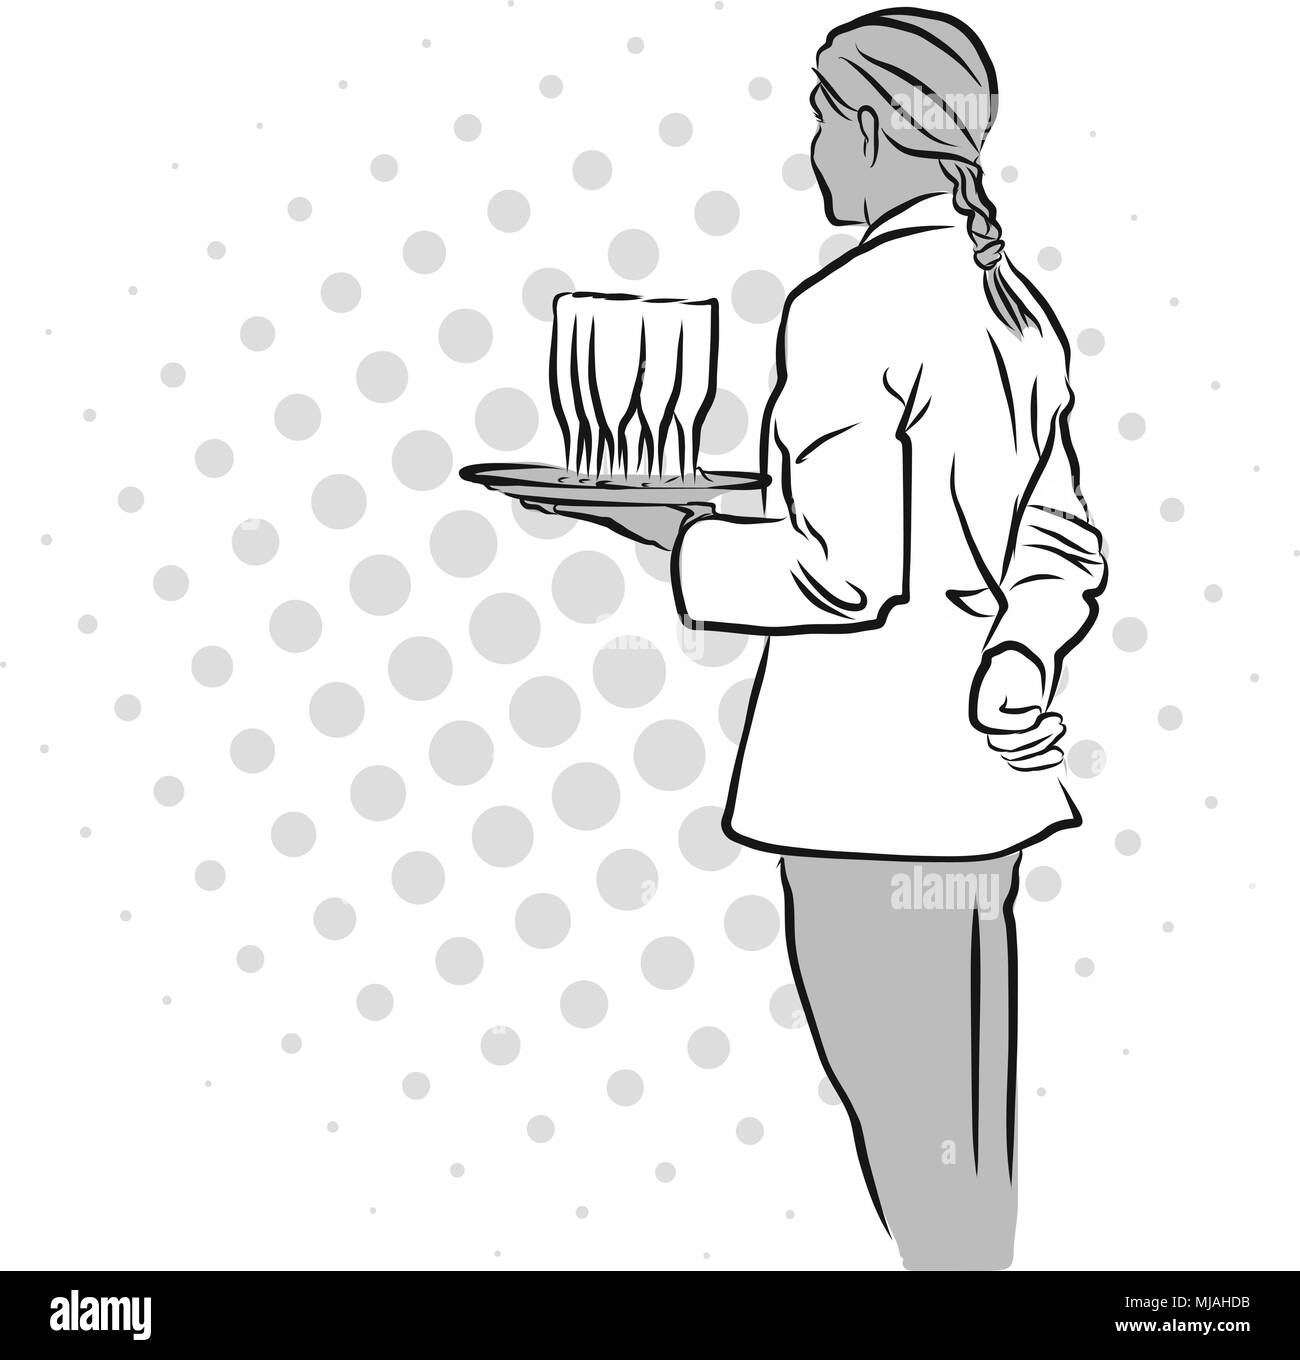 Steward from back holding table with champagne glasses Hand Drawn Outline Sketch, Stock Vector